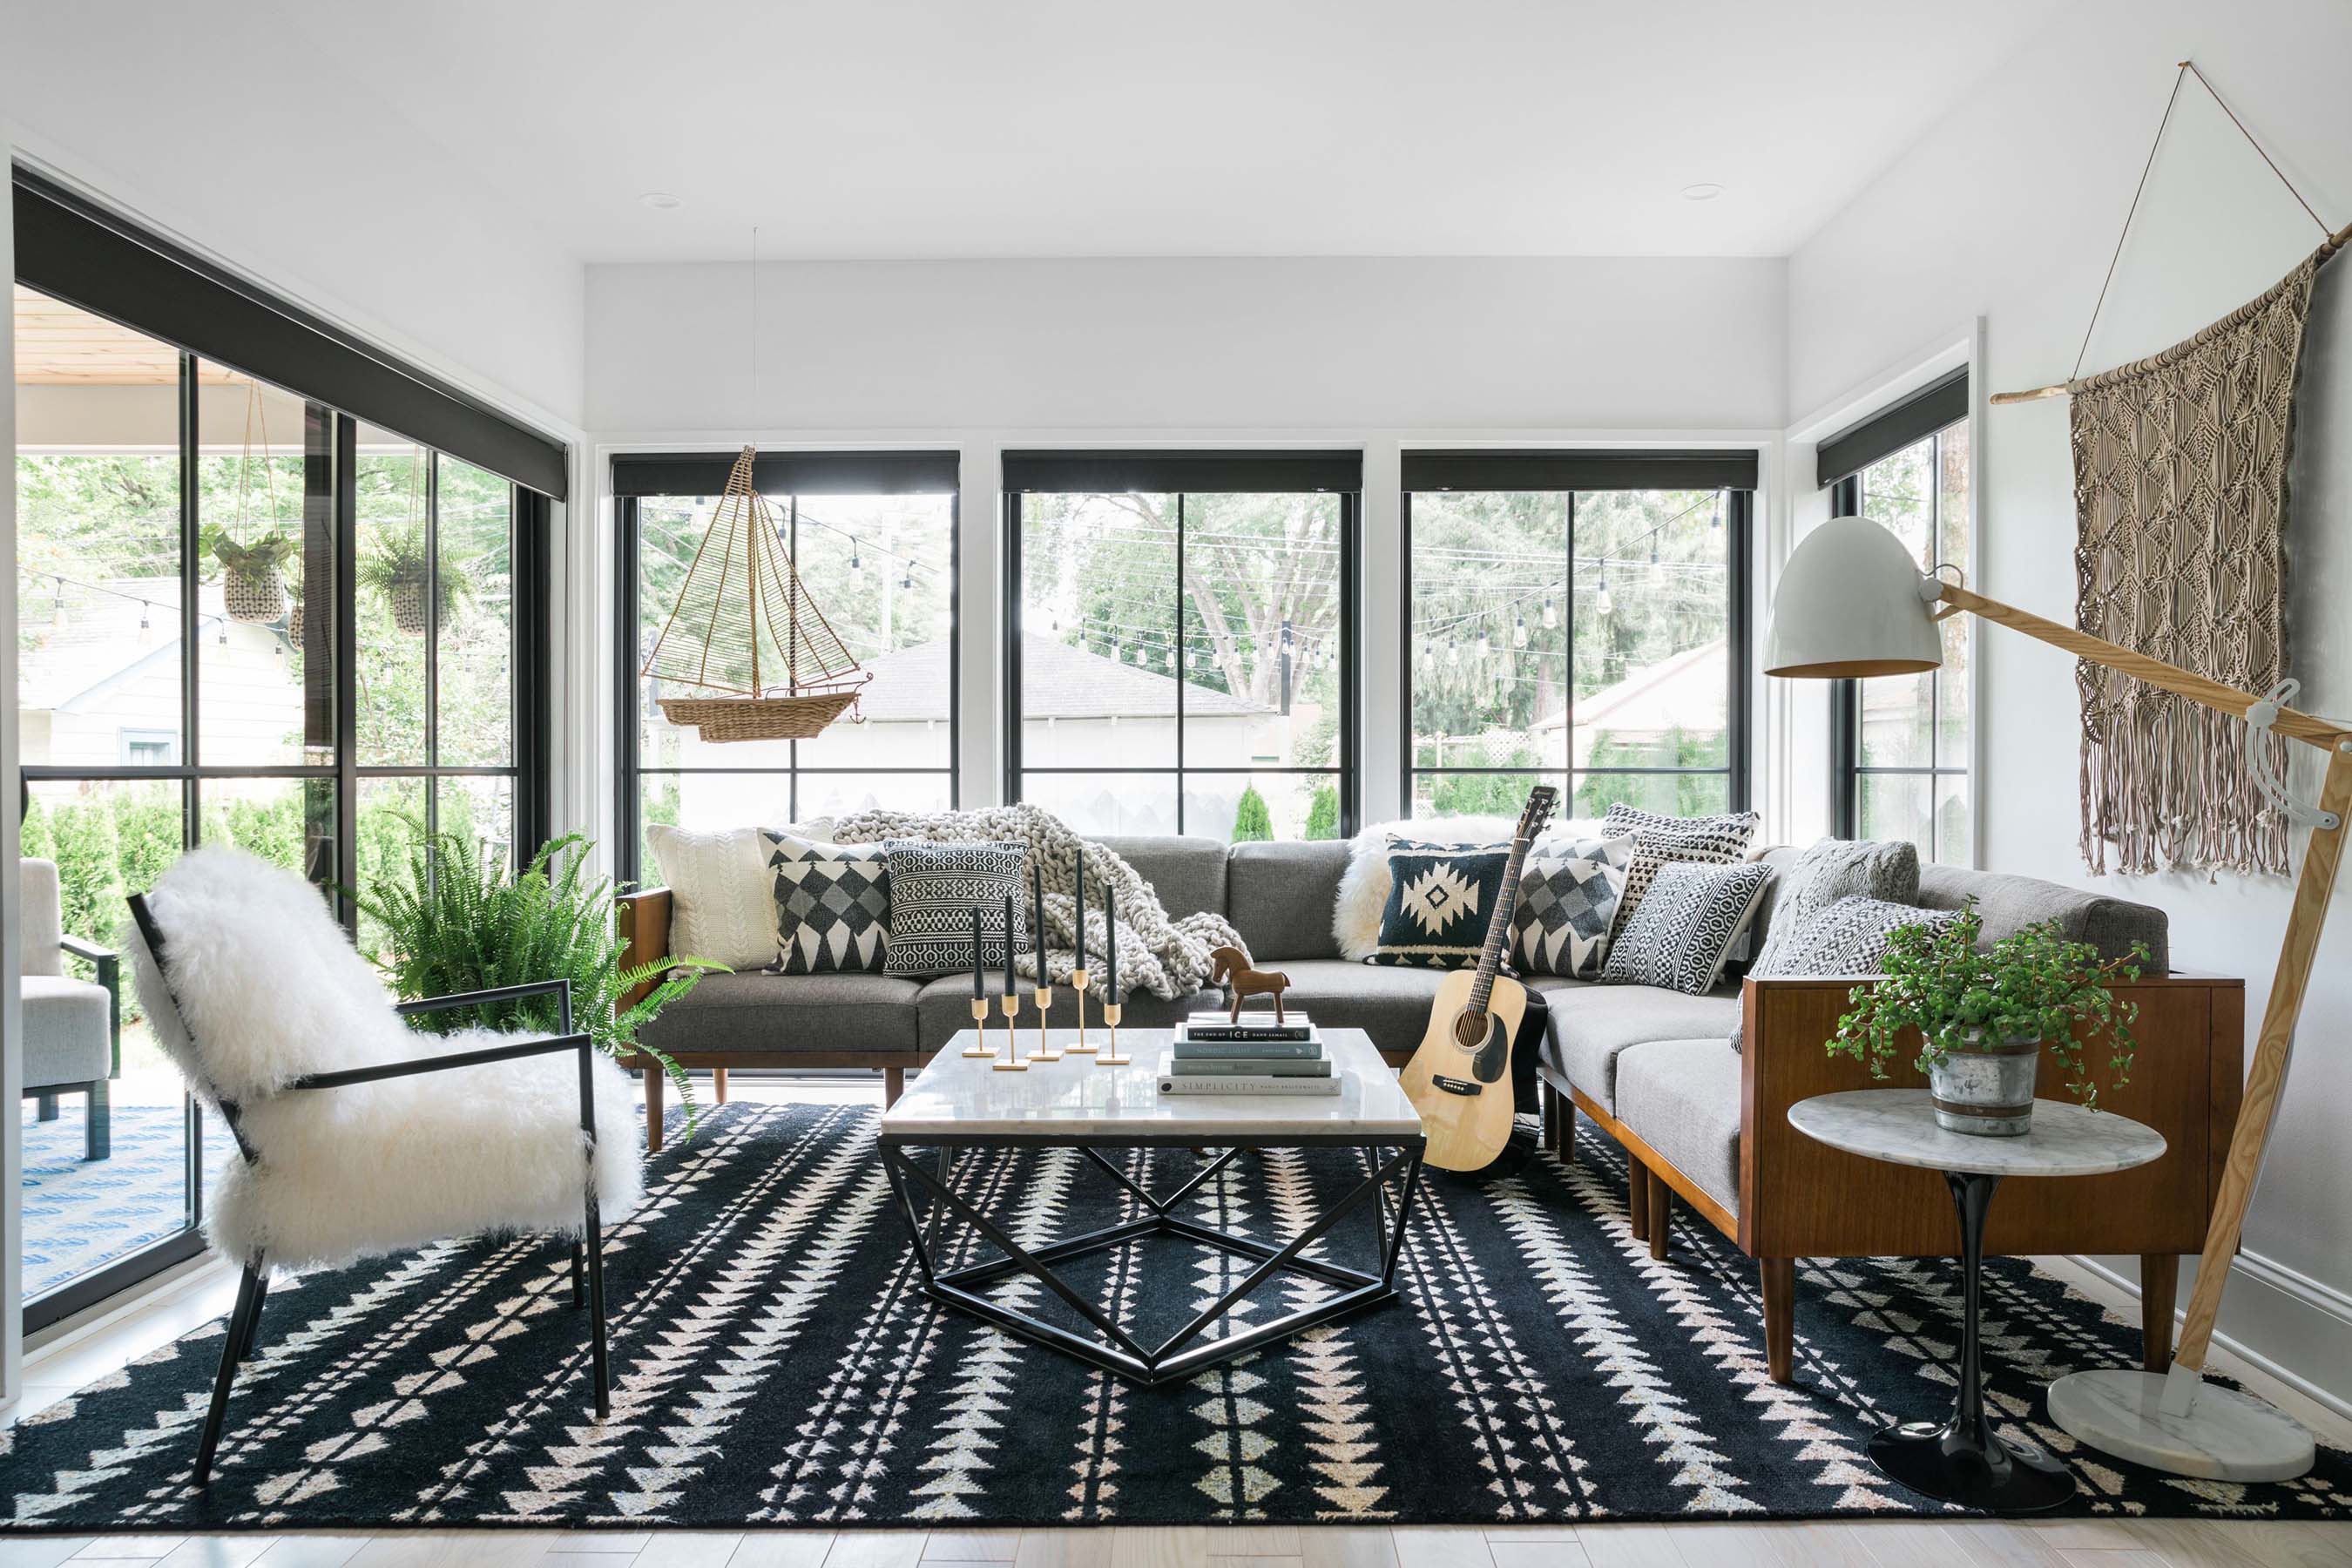 The picture of comfy-cozy, the HGTV Urban Oasis 2019 living room boasts a 10-person sectional and lots of contrasting black-and-white décor, not to mention an oversized wall mural reflecting a classic Nordic sweater pattern.